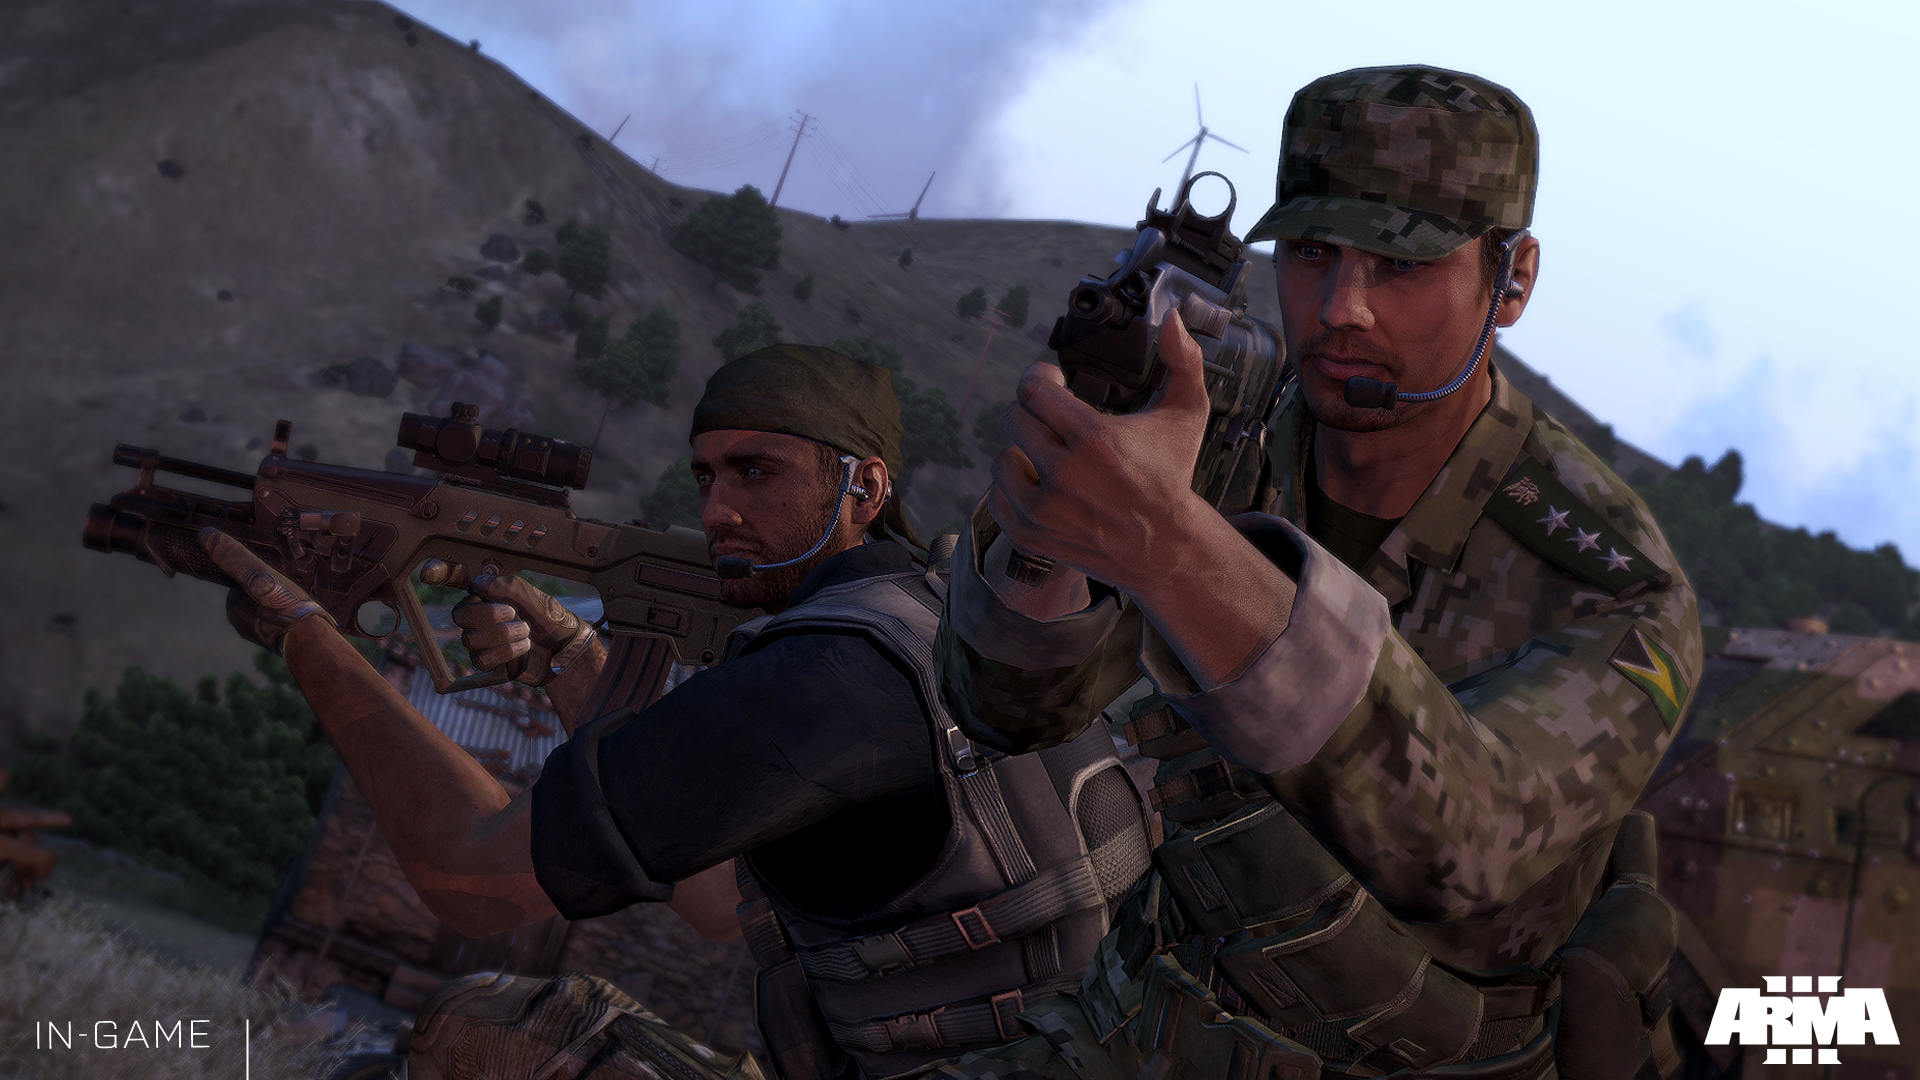 Arma 3 S Second Campaign Episode Adapt Now Available News Arma 3